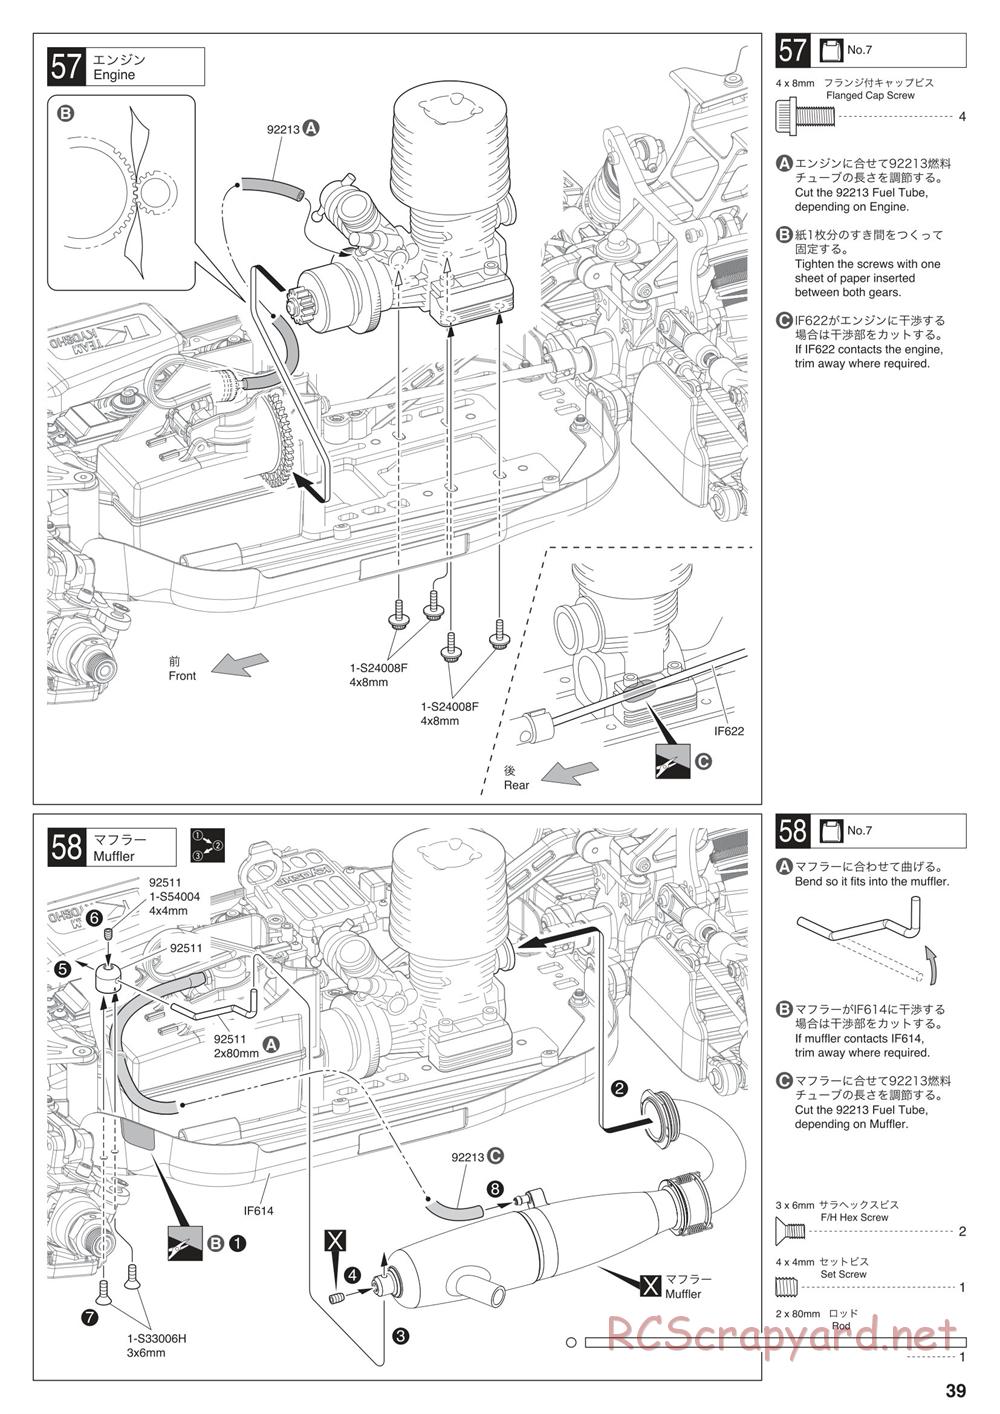 Kyosho - Inferno MP10 - Manual - Page 39